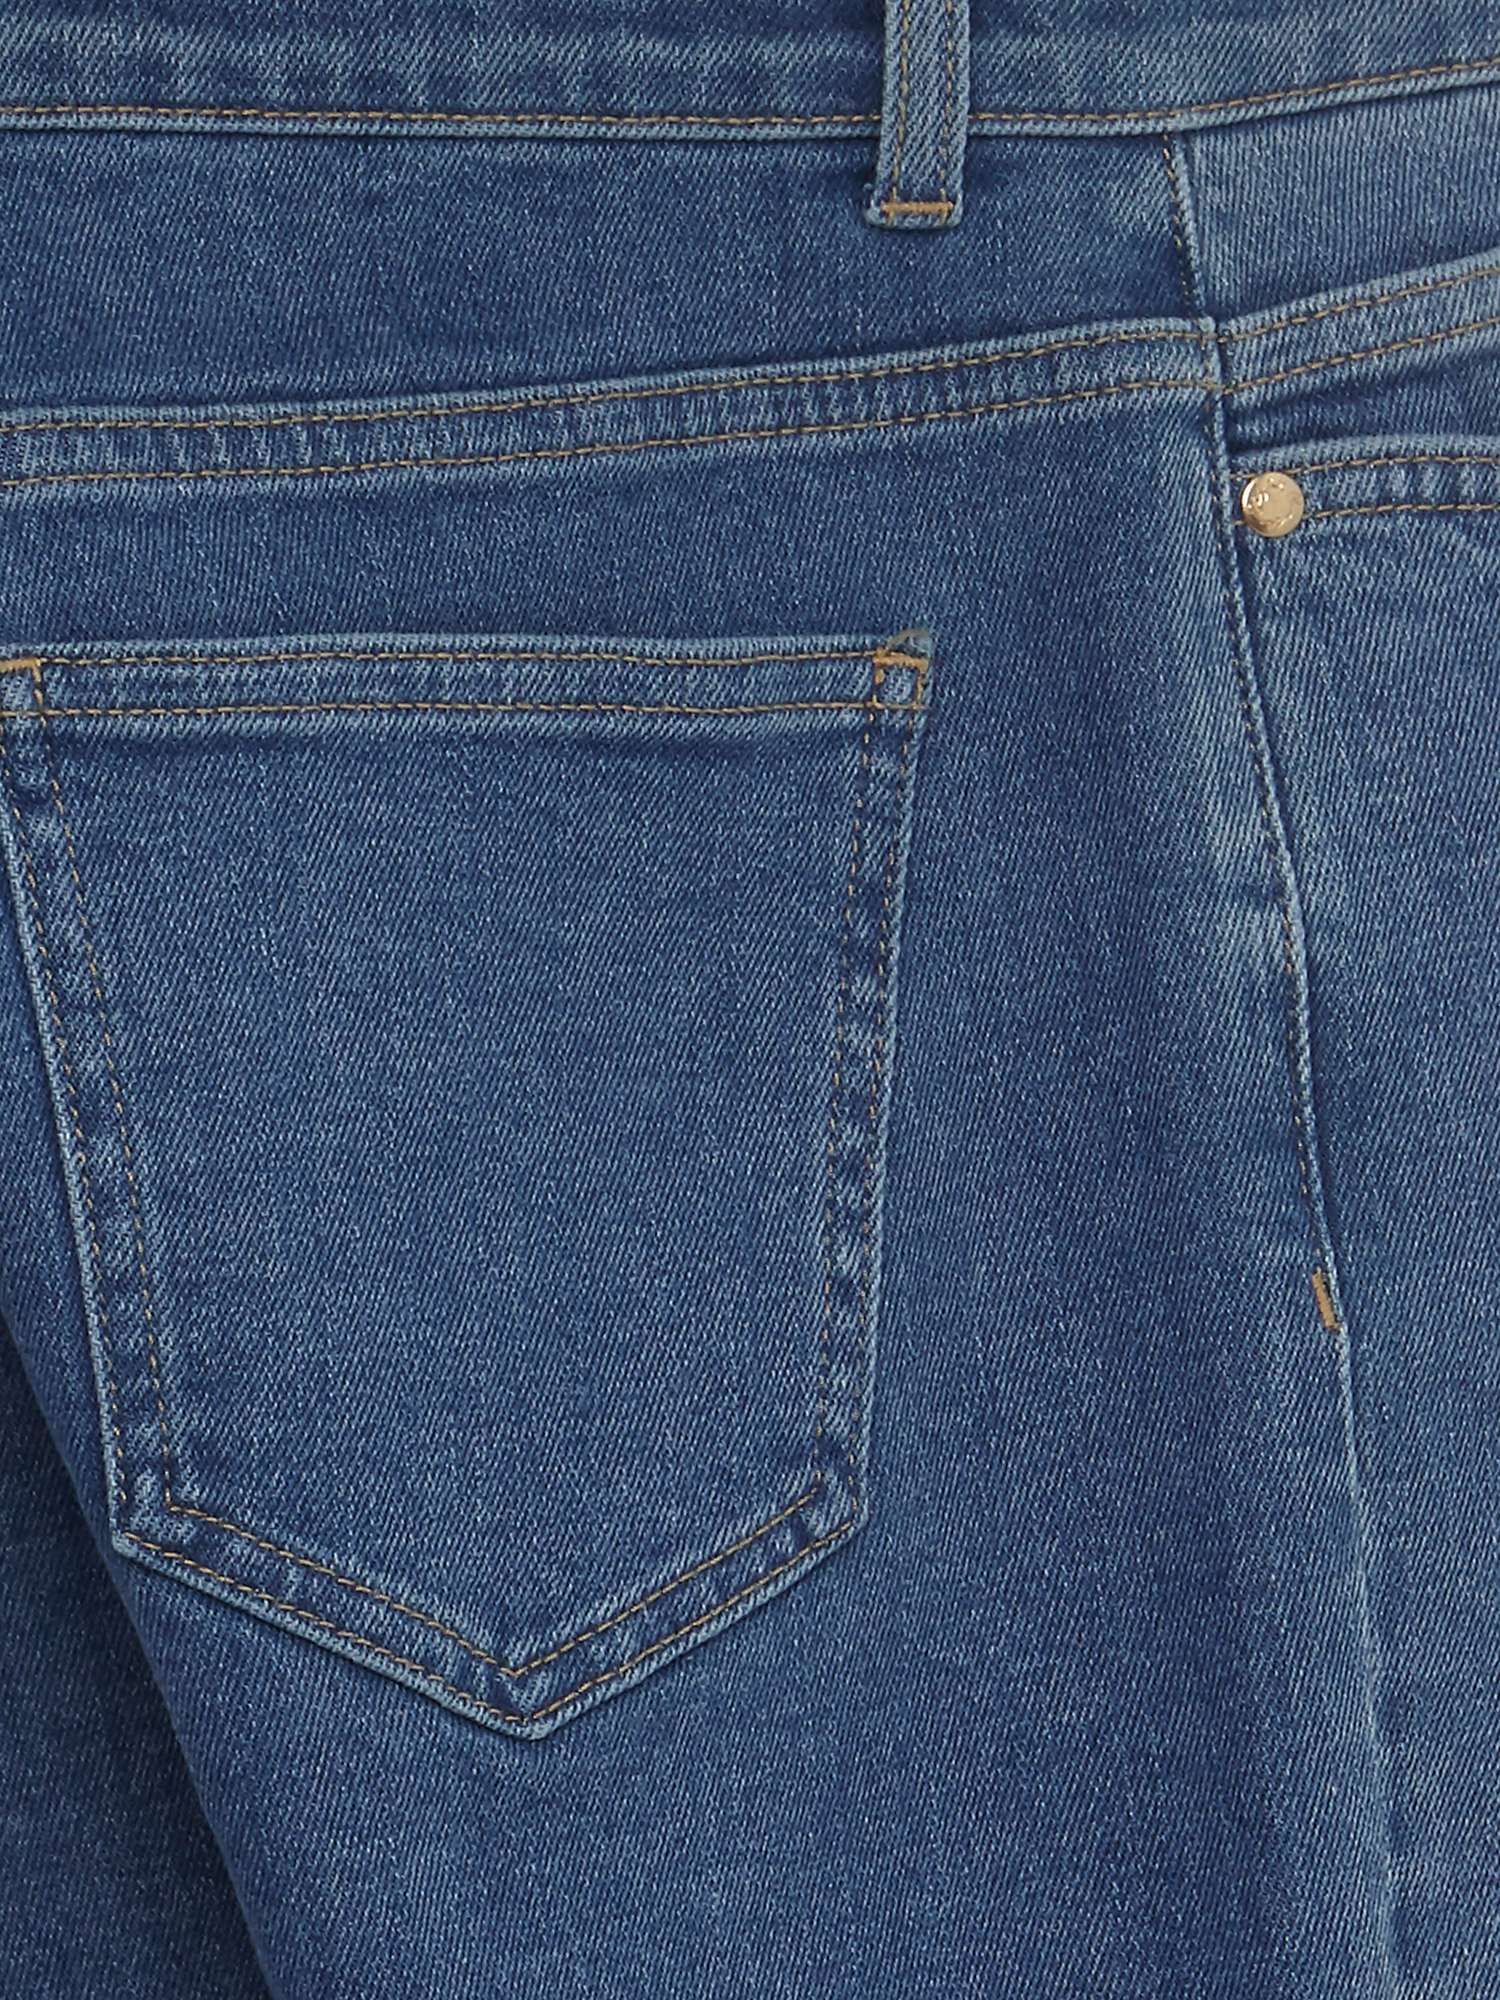 Buy Phase Eight Petra Raw Hem Cropped Jeans, Blue Online at johnlewis.com